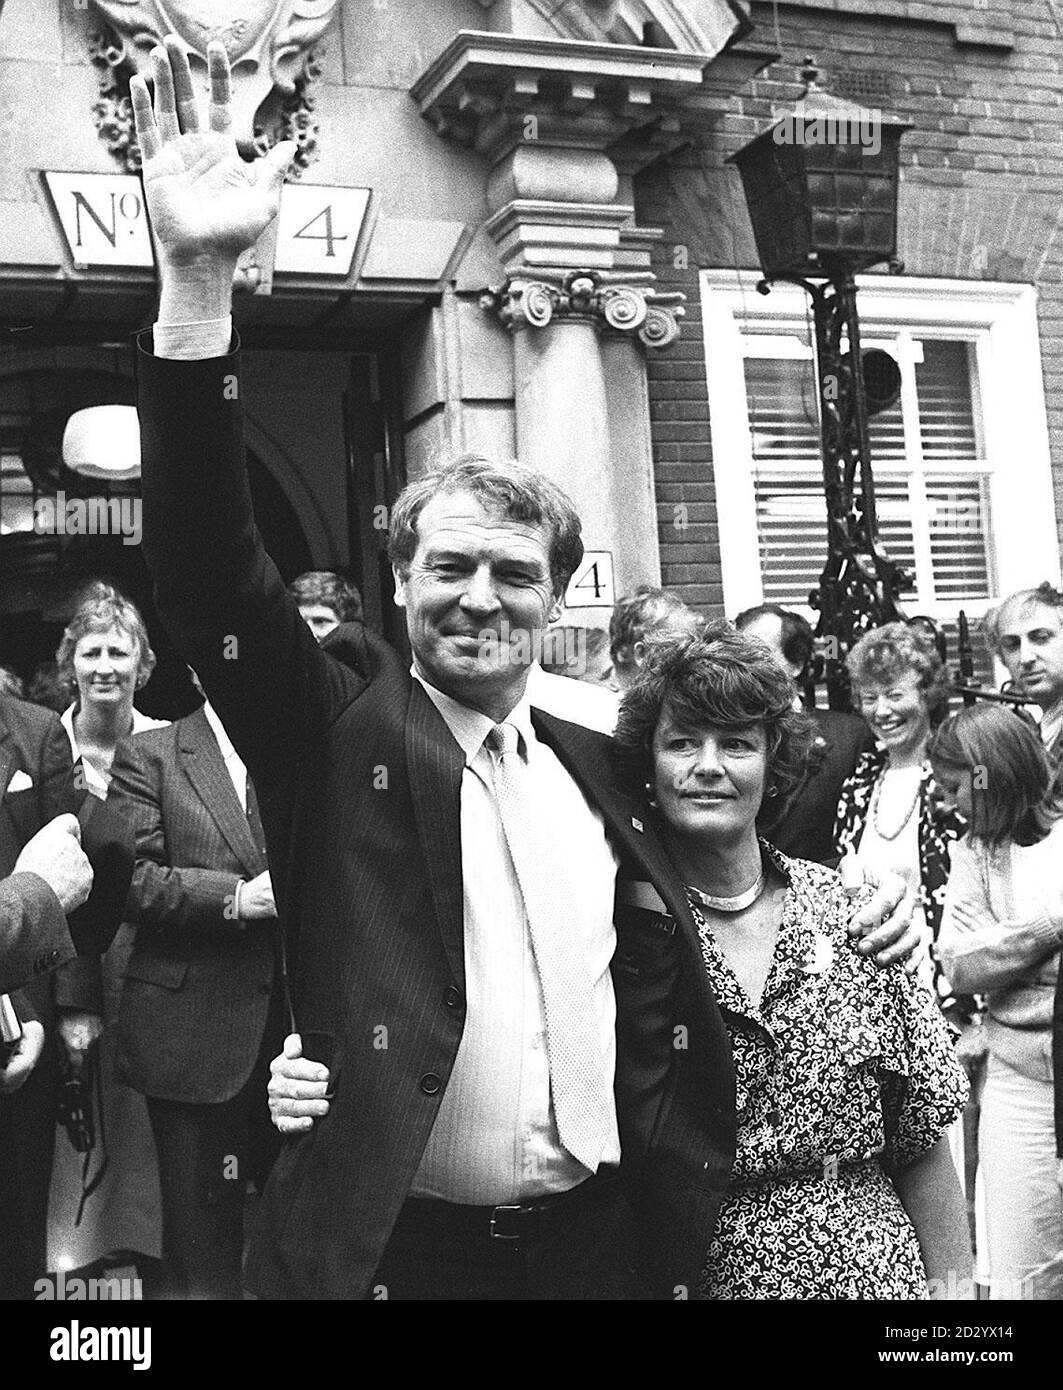 28TH JULY: On this day in 1988 Paddy Ashdown, the MP for Yeovil was elected the leader of the new Social and Liberal Democratic Party. He is seen here celebrating with his wife Jane. Mr Paddy Ashdown and his wife Jane celebrate outside the offices of the Social and Liberal Democrats in London after he was elected leader of the new party. 22/7/98: 10th anniversary as leader. 20/1/99: Ashdown to stand down as leader in June 1999. * after the European elections and as MP for Yeovil at the next general election. Stock Photo